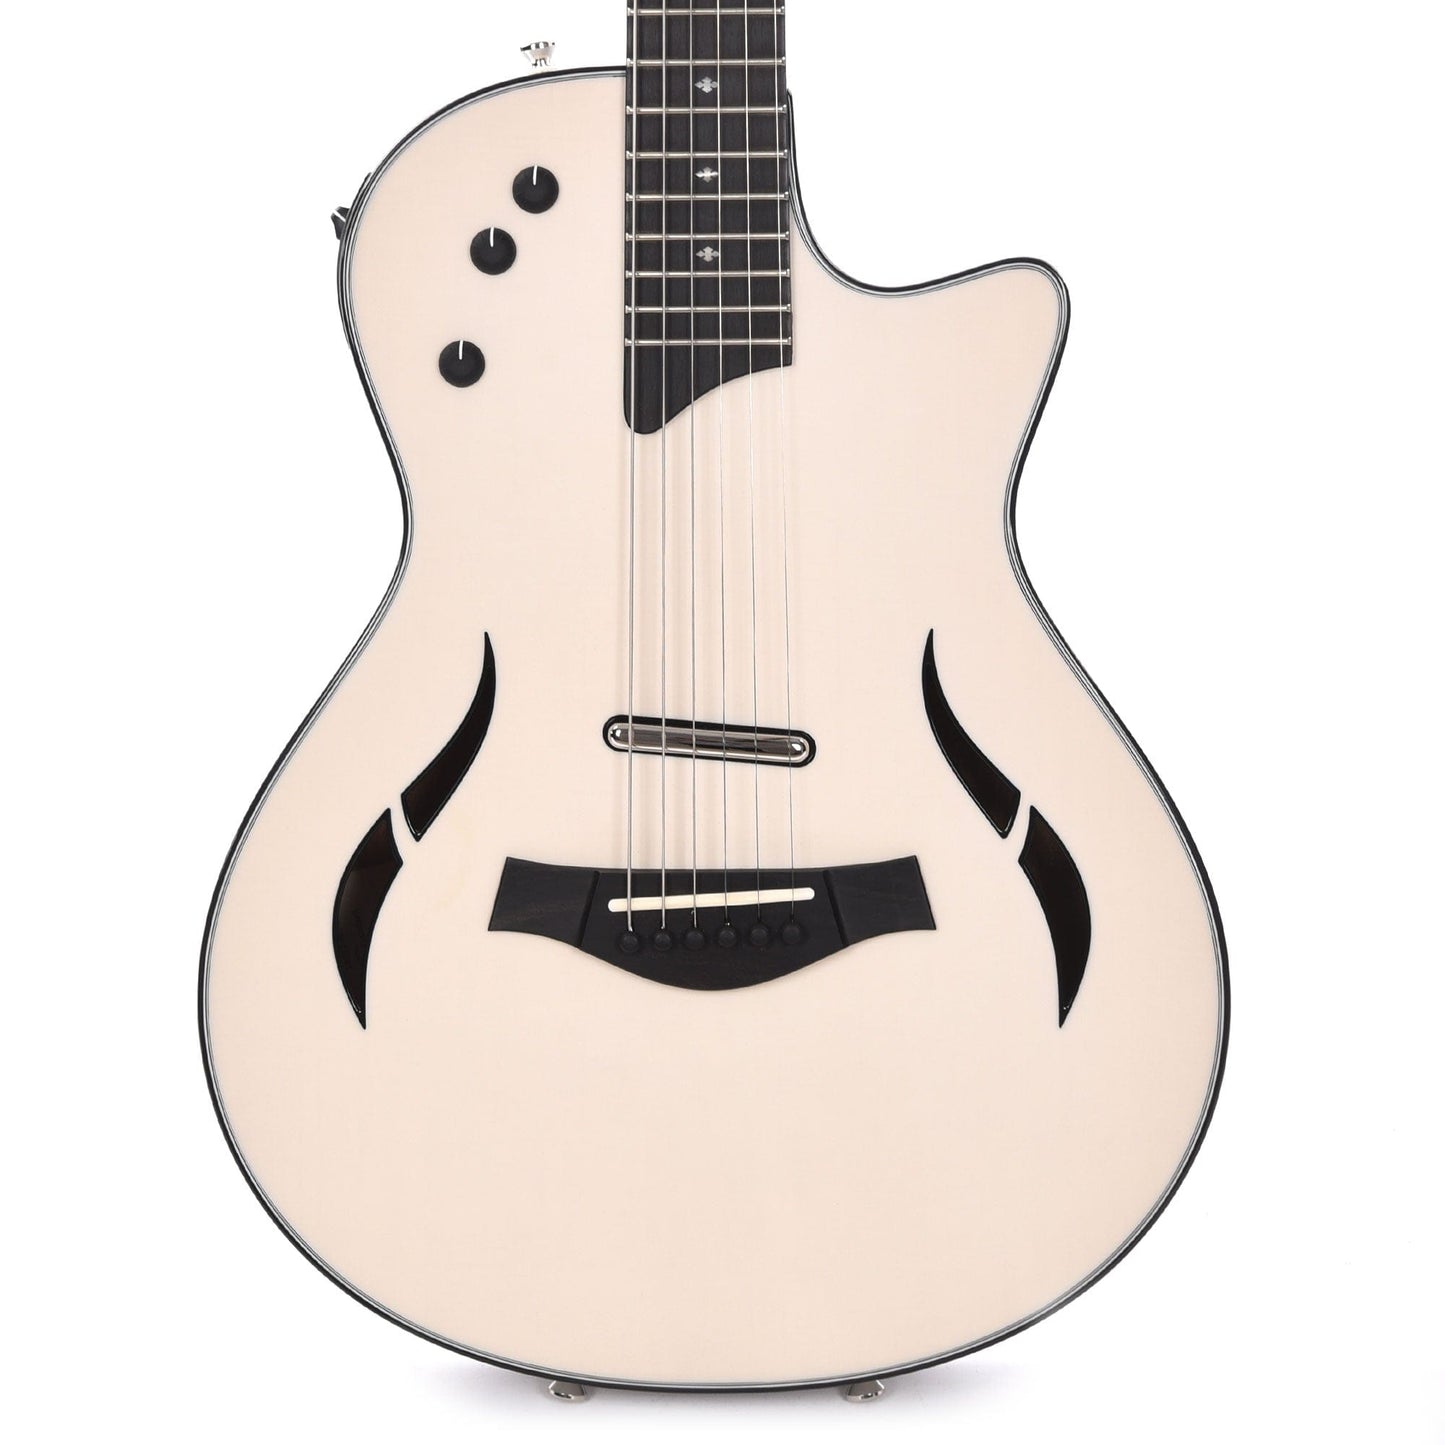 Taylor T5Z Standard Trans White w/Aerocase (Serial #1207292001) Electric Guitars / Semi-Hollow,Electric Guitars / Solid Body